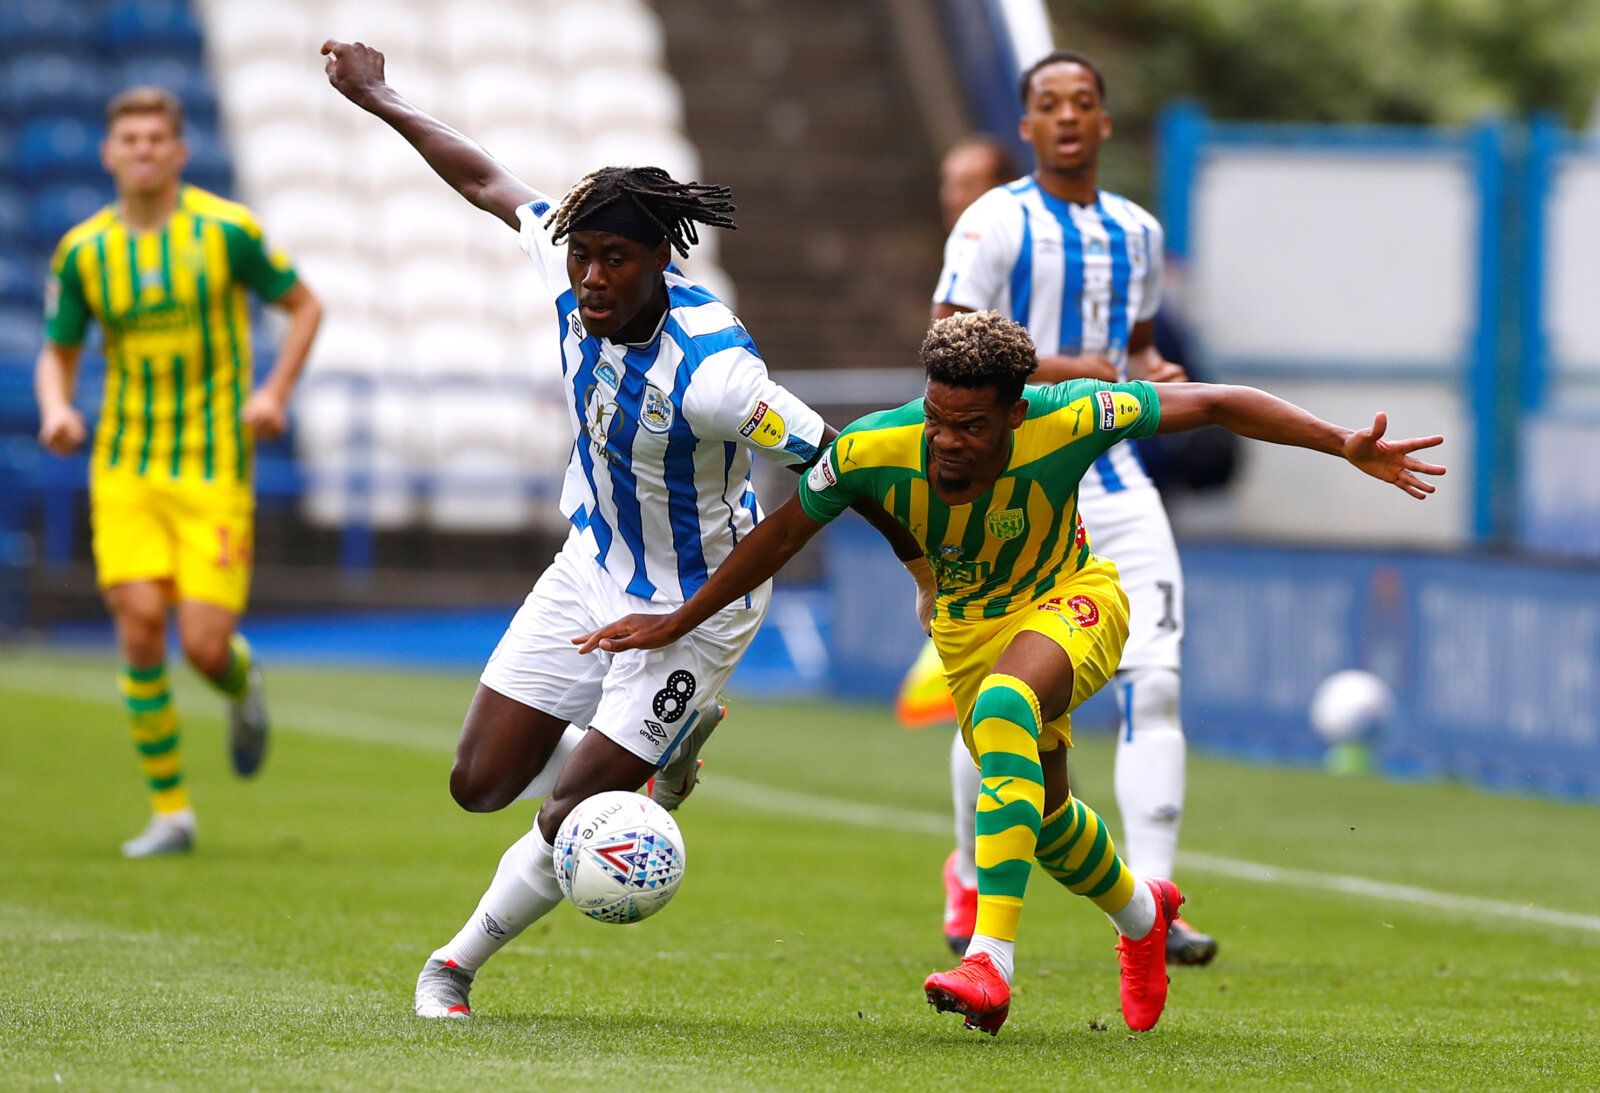 Soccer Football - Championship - Huddersfield Town v West Bromwich Albion - John Smith's Stadium, Huddersfield, Britain - July 17, 2020   Huddersfield Town's Trevoh Chalobah in action with West Bromwich Albion's Grady Diangana   Action Images/Jason Cairnduff    EDITORIAL USE ONLY. No use with unauthorized audio, video, data, fixture lists, club/league logos or 